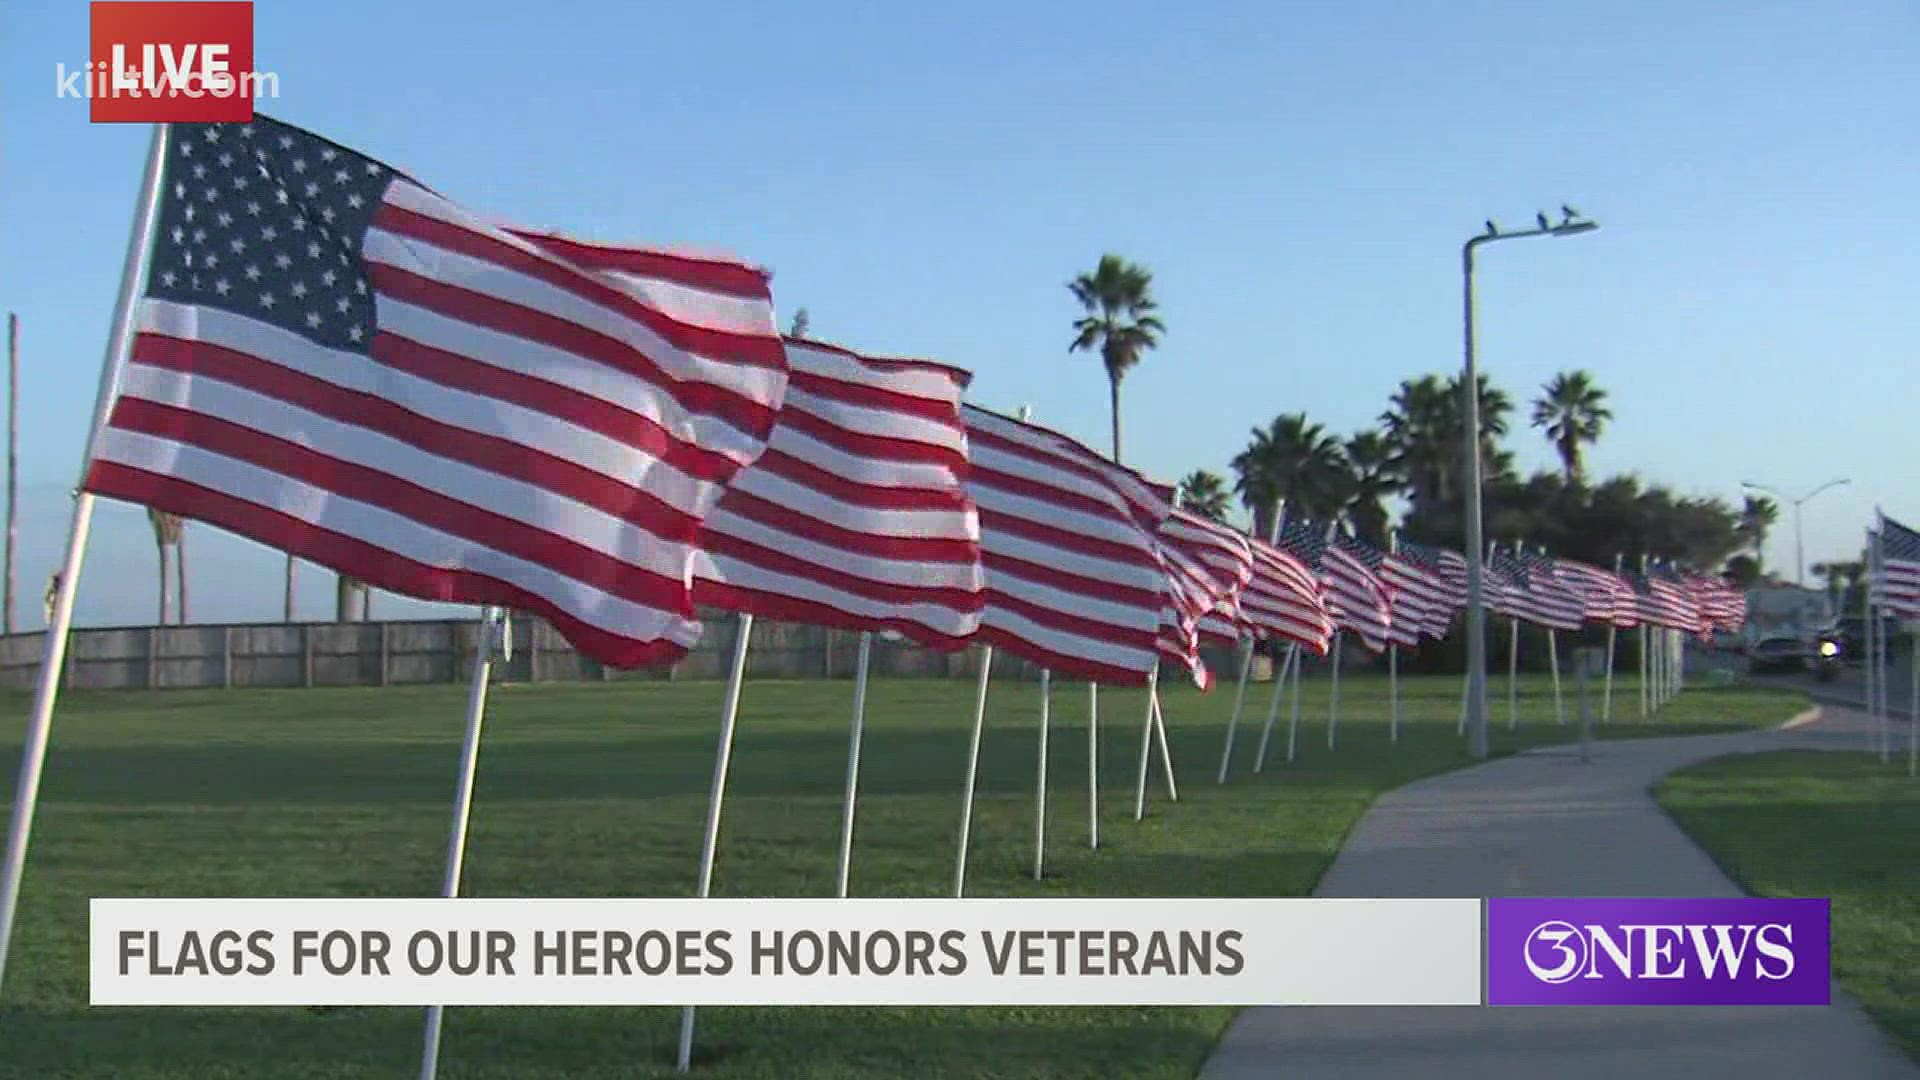 The project honors veterans and all heroes of the community. Throughout a six-month period, the flags are installed at various parks along the Corpus Christi Bay.